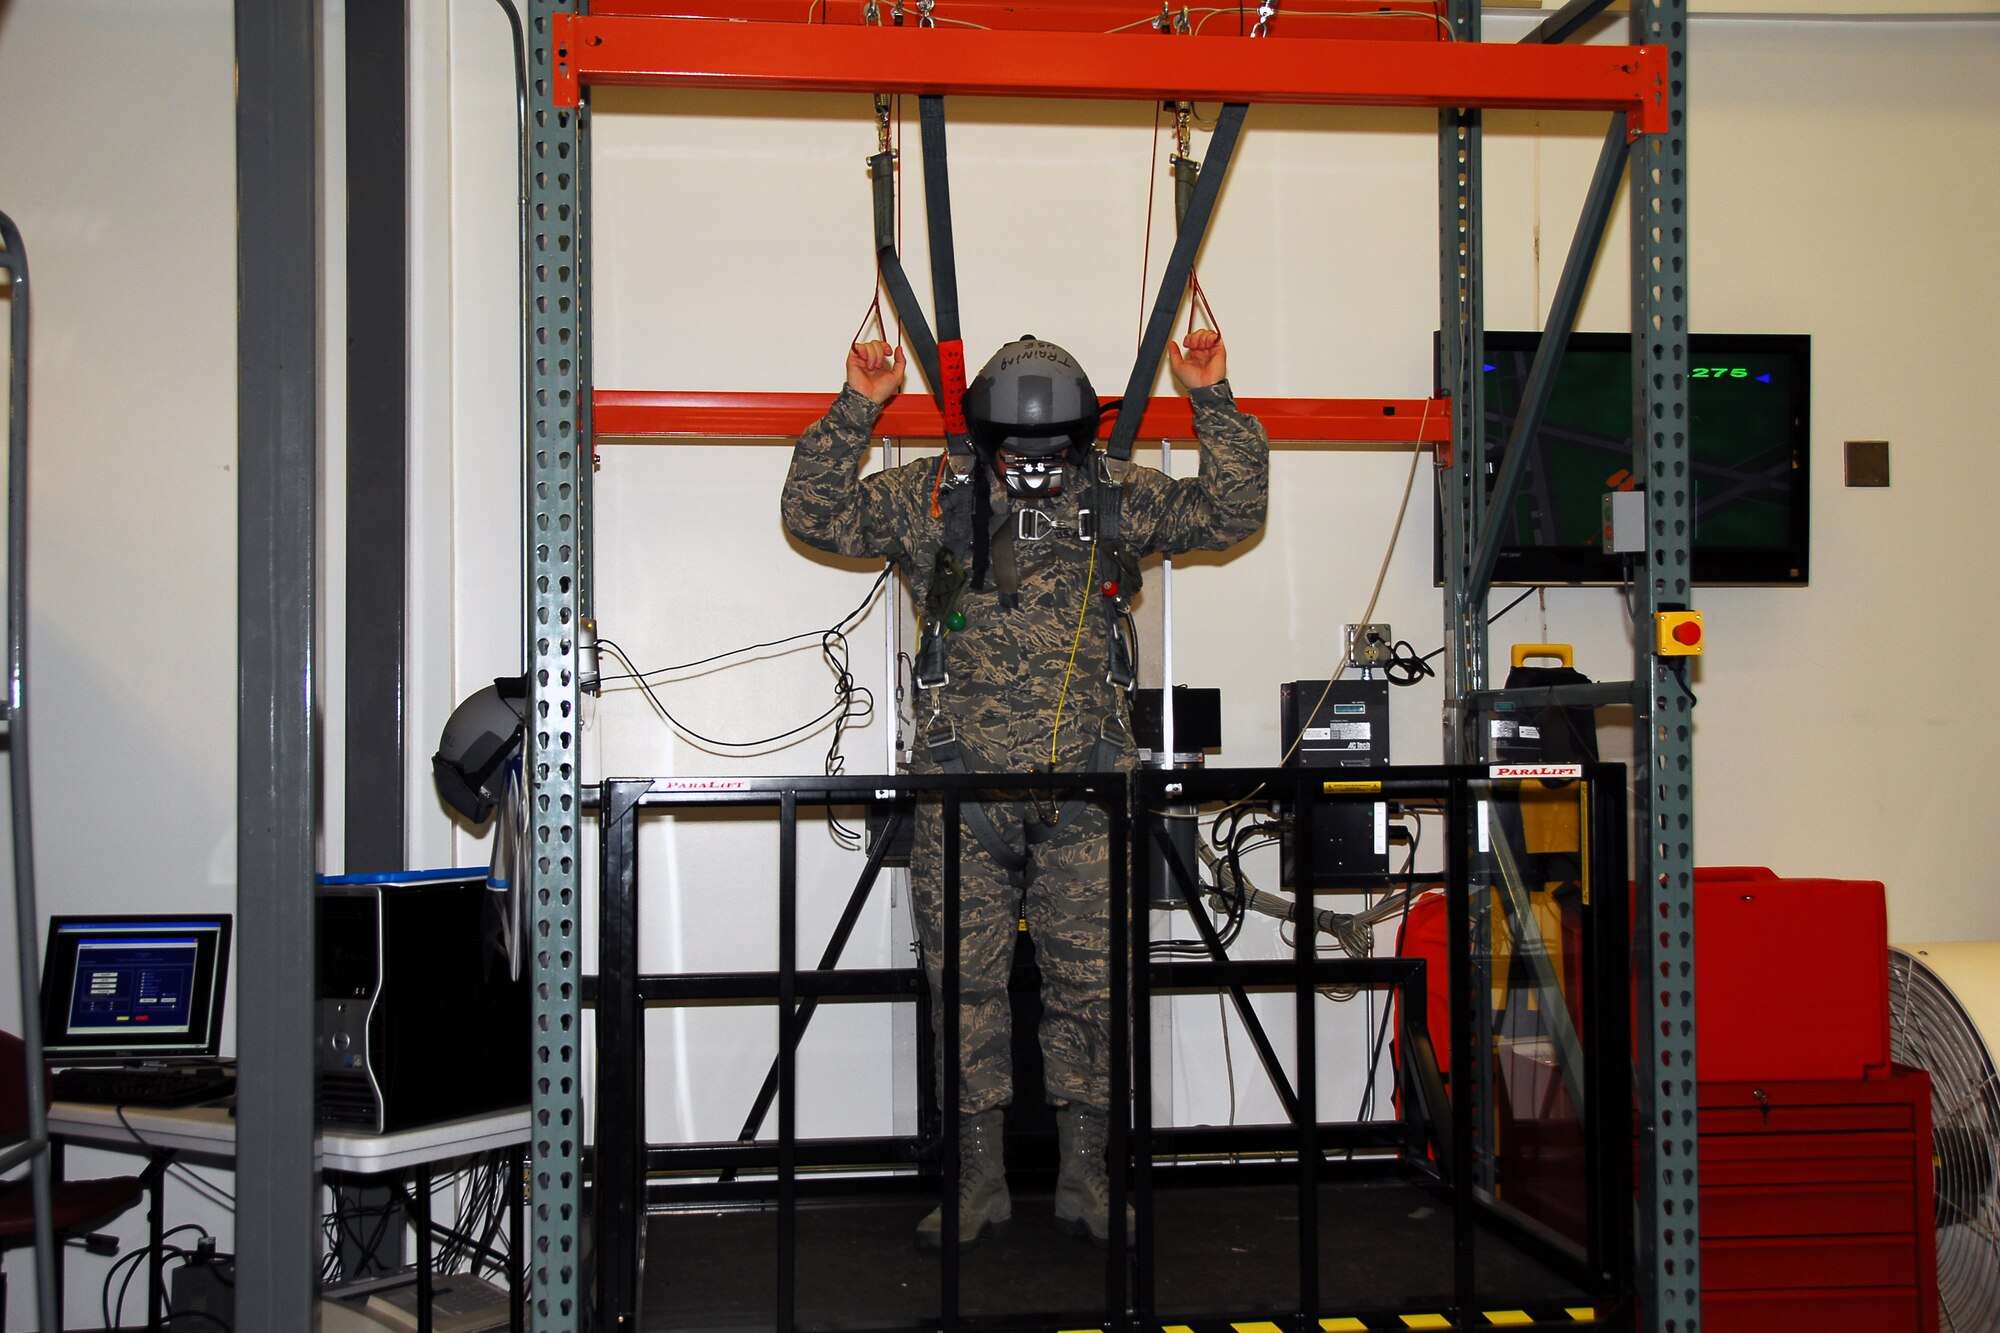 Chief Master Sergeant Steven Larwood, 22nd Air Force command cheif, attempts his landing in the parachute simulator at the 403rd Aircrew Flight Equipment shop. The computer to the left of the photo is where the instructor sets up a scenario and the screne to the right is what Chief Larwood views in his virtual helmet. This is one of the many shops the chief visited at the 403rd Wing's UTA. (U.S. Air Force Photo by Senior Airman Tabitha Dupas)